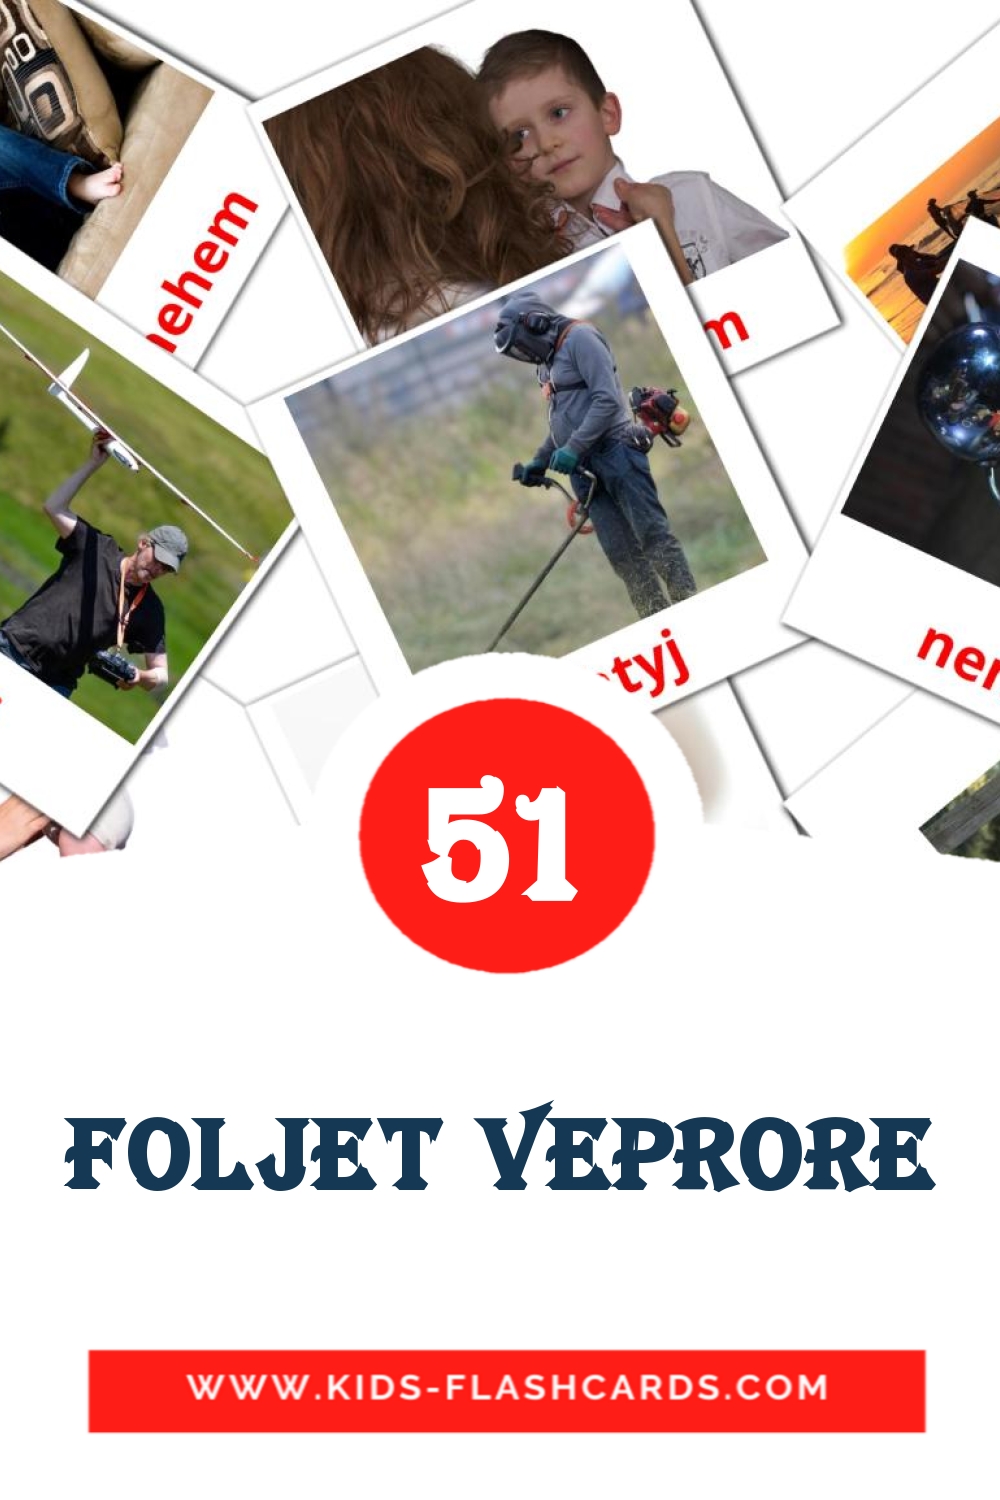 54 Foljet veprore Picture Cards for Kindergarden in albanian